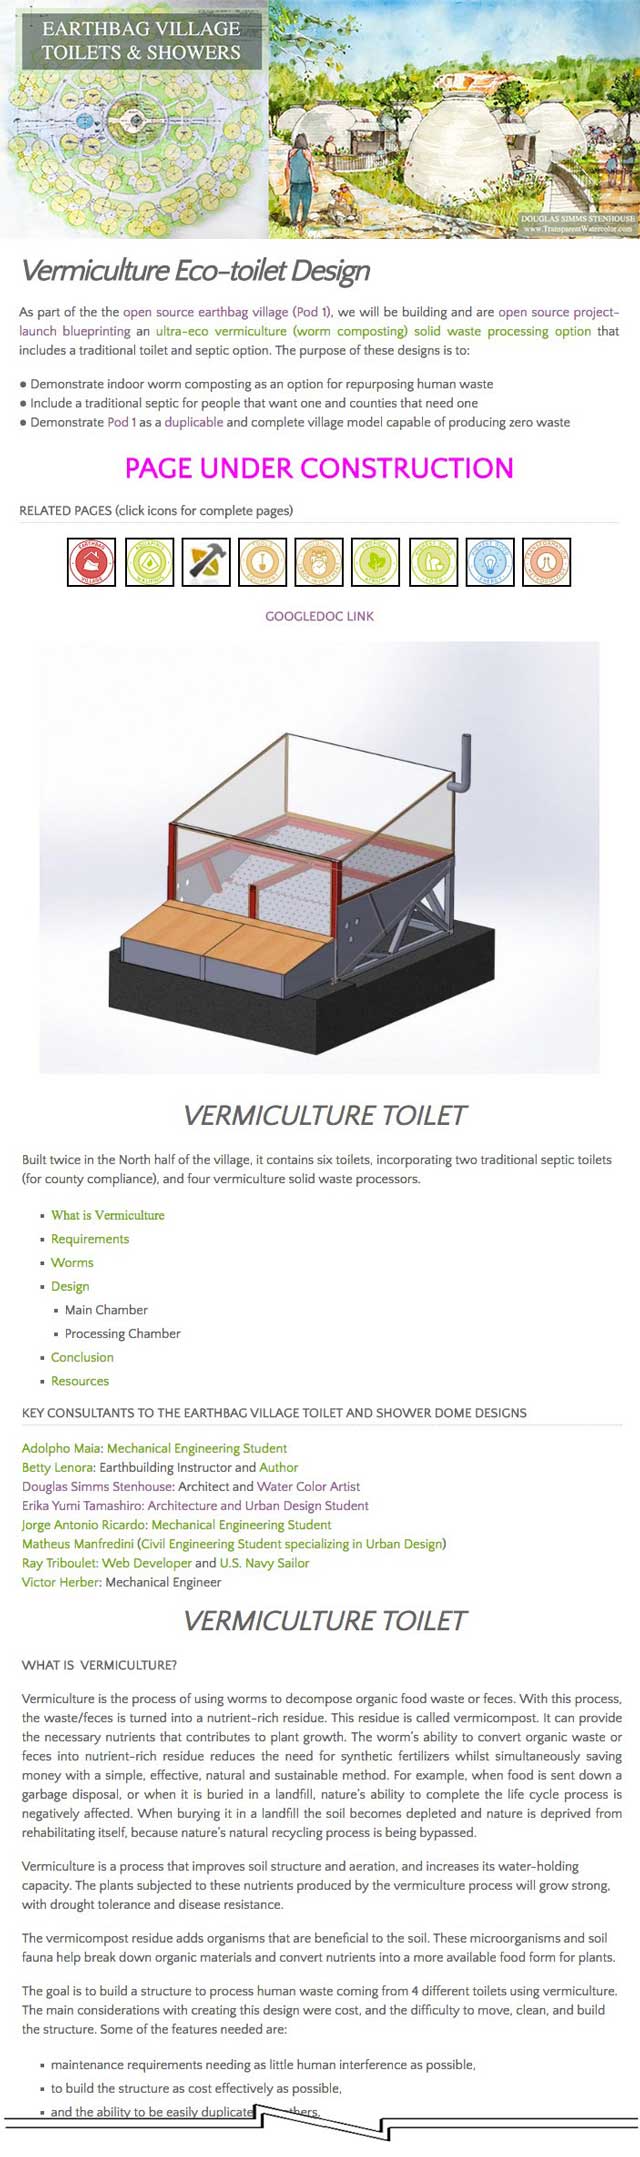 Ray Triboulet (Web Developer and Active Duty U.S. Sailor) also began moving the Earthbag Village (Pod 1) communal Vermiculture Eco-Toilet design details to their own page. You can see this work here. , restoring sustainable balance